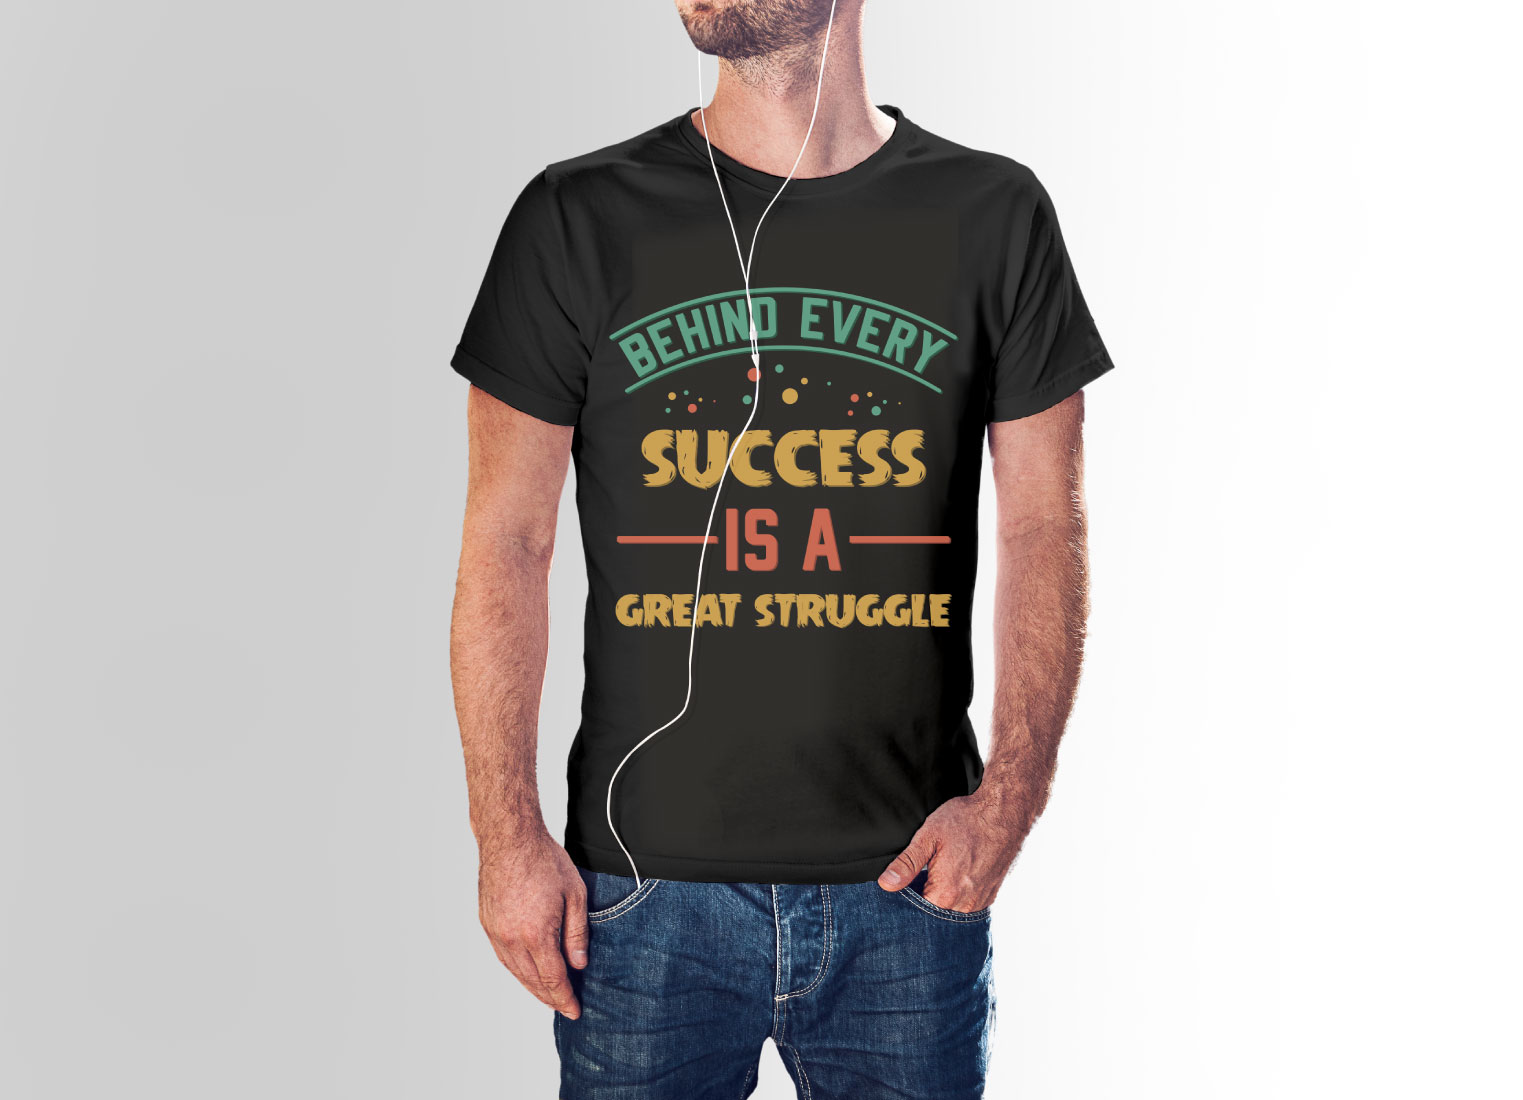 behind every success is a great struggle tshirt design 556